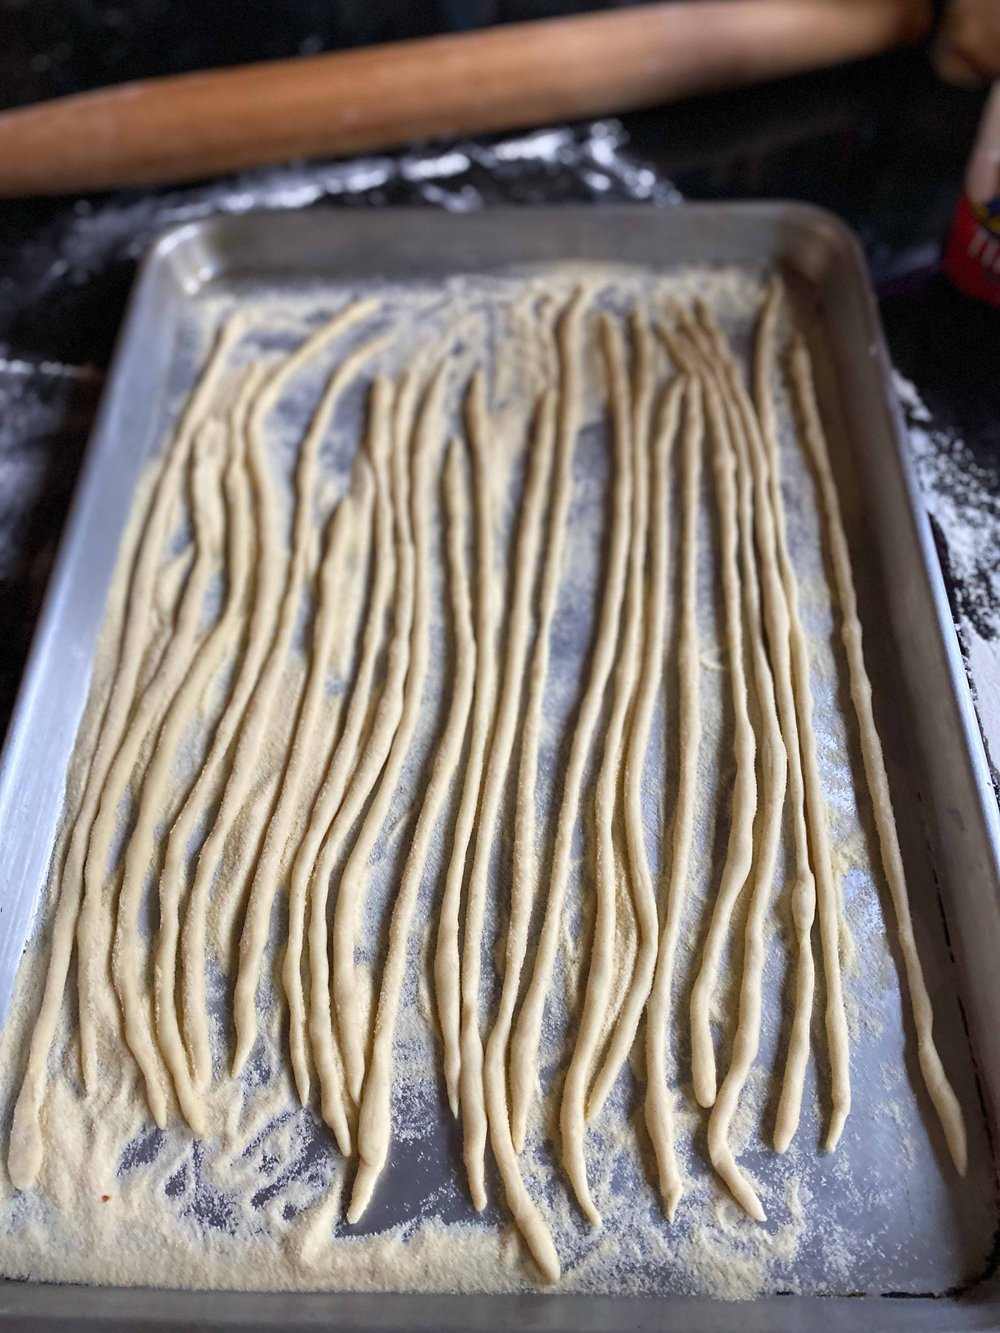 Pici (Hand-Rolled Thick Spaghetti)